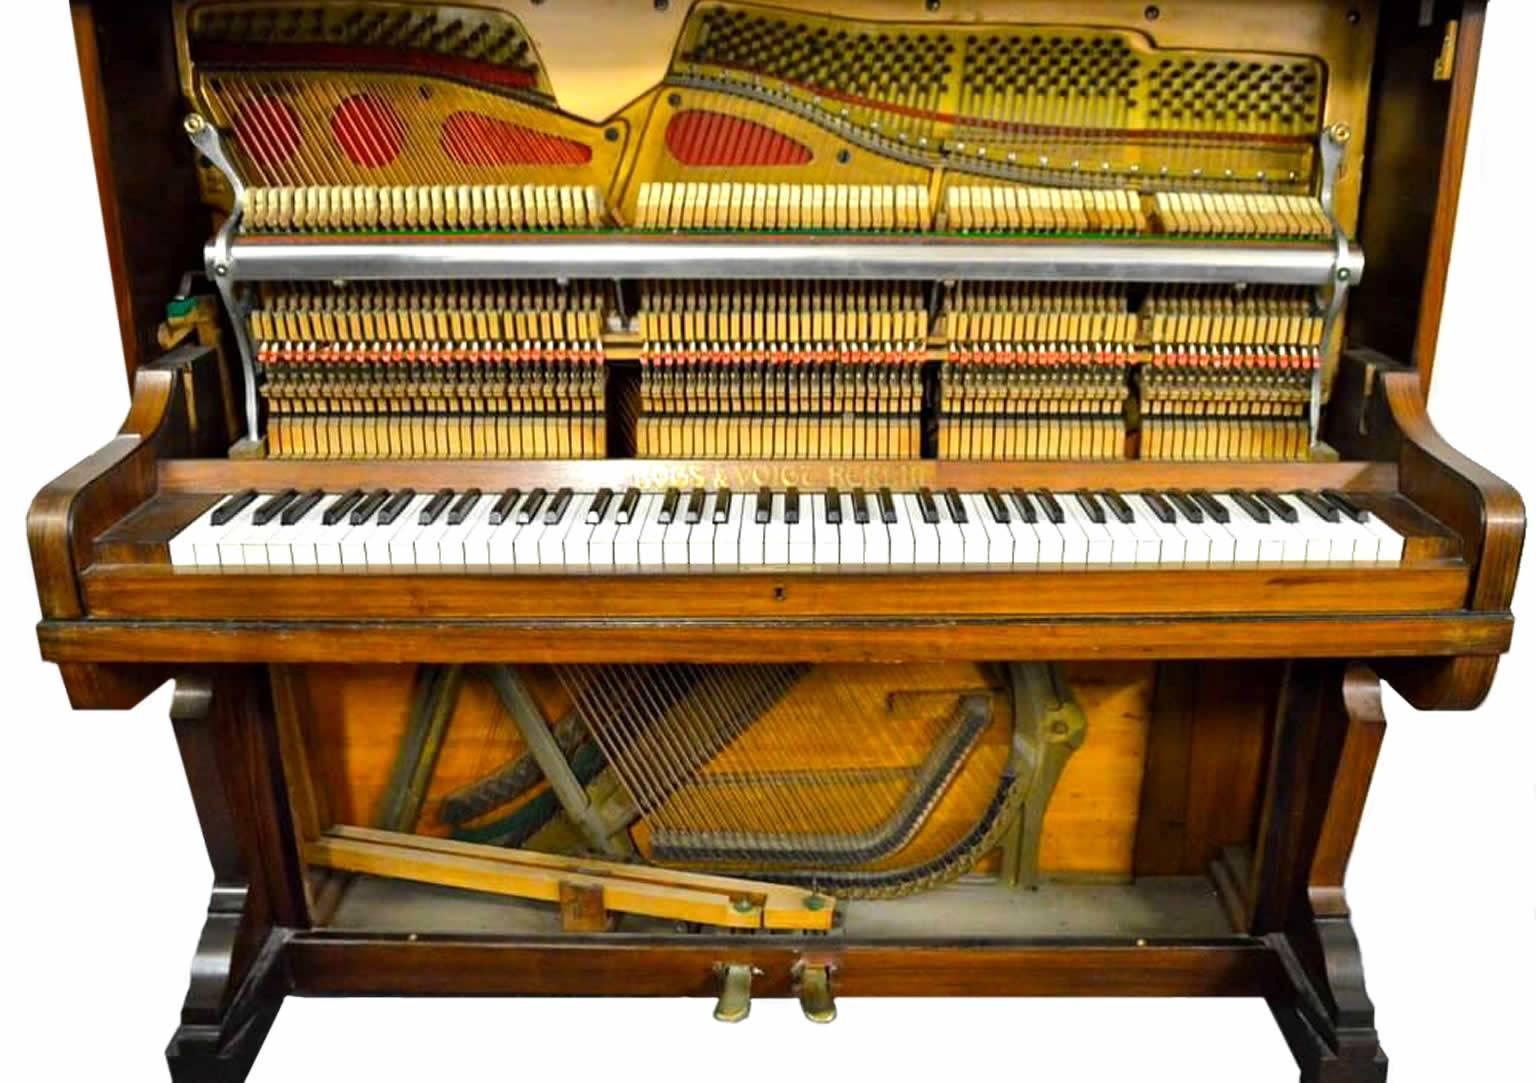 This is a very beautiful piano crafted by the German piano maker Bogs & Voight. The company was based in Berlin, Germany and embodied everything that is great in piano making - handcrafted tradition using the finest of materials and processes